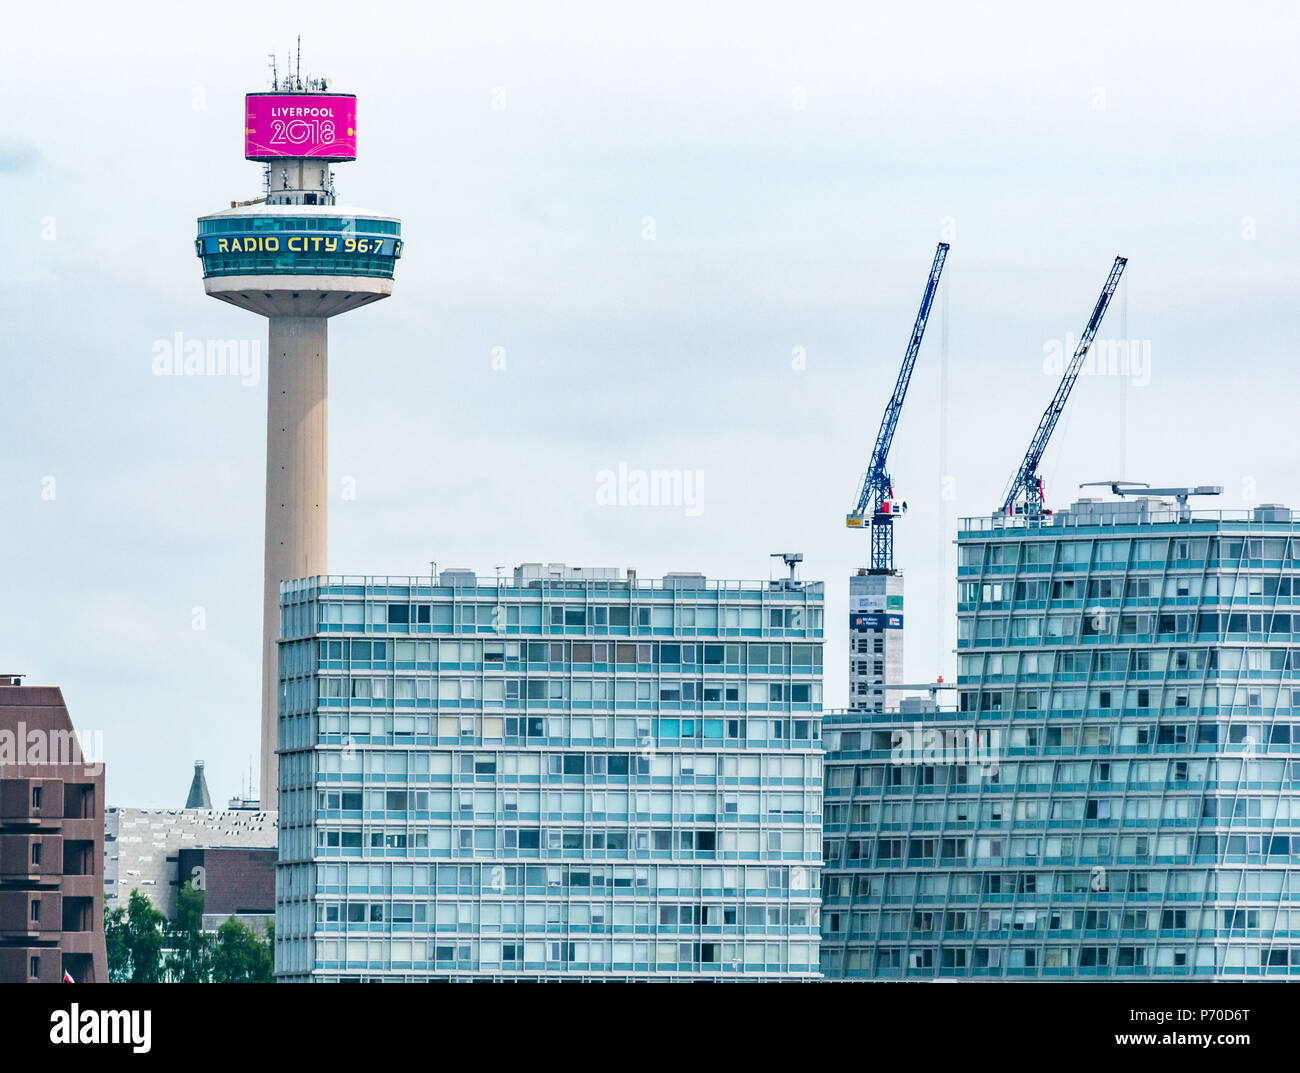 St John's Beacon Radio City observation tower with Liverpool 2018 banner and modern office buildings,Liverpool, England, UK Stock Photo